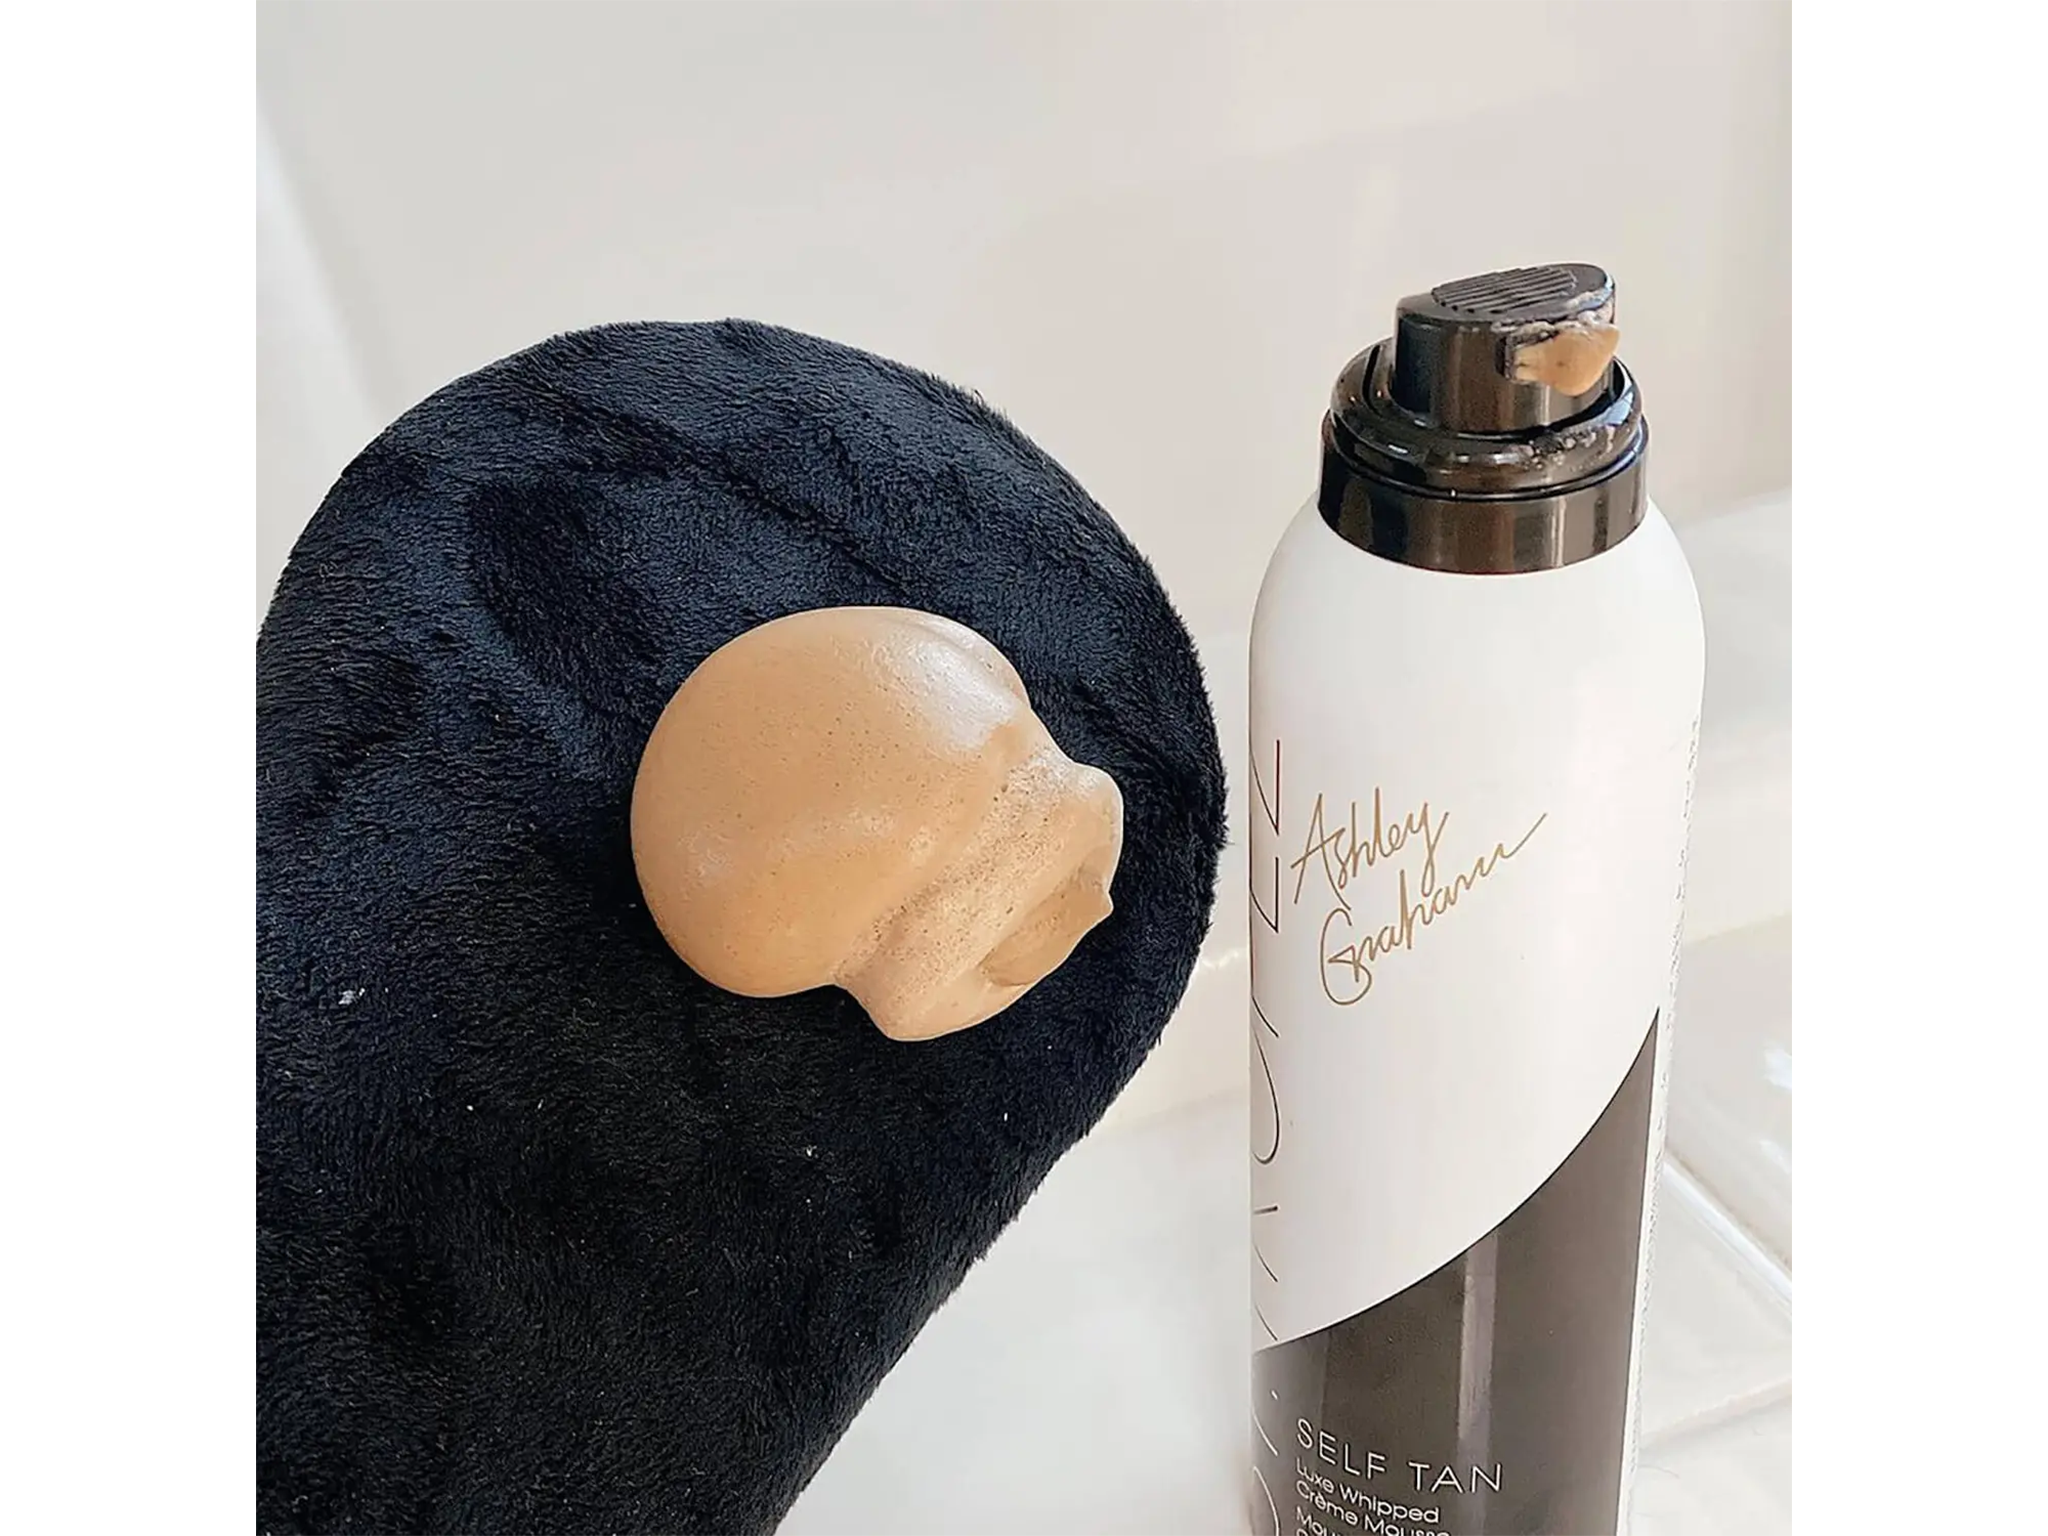 St.Tropez Tan x Ashley Graham limited edition ultimate glow kit- Was £38 now £22.80, Lookfantastic.com.png